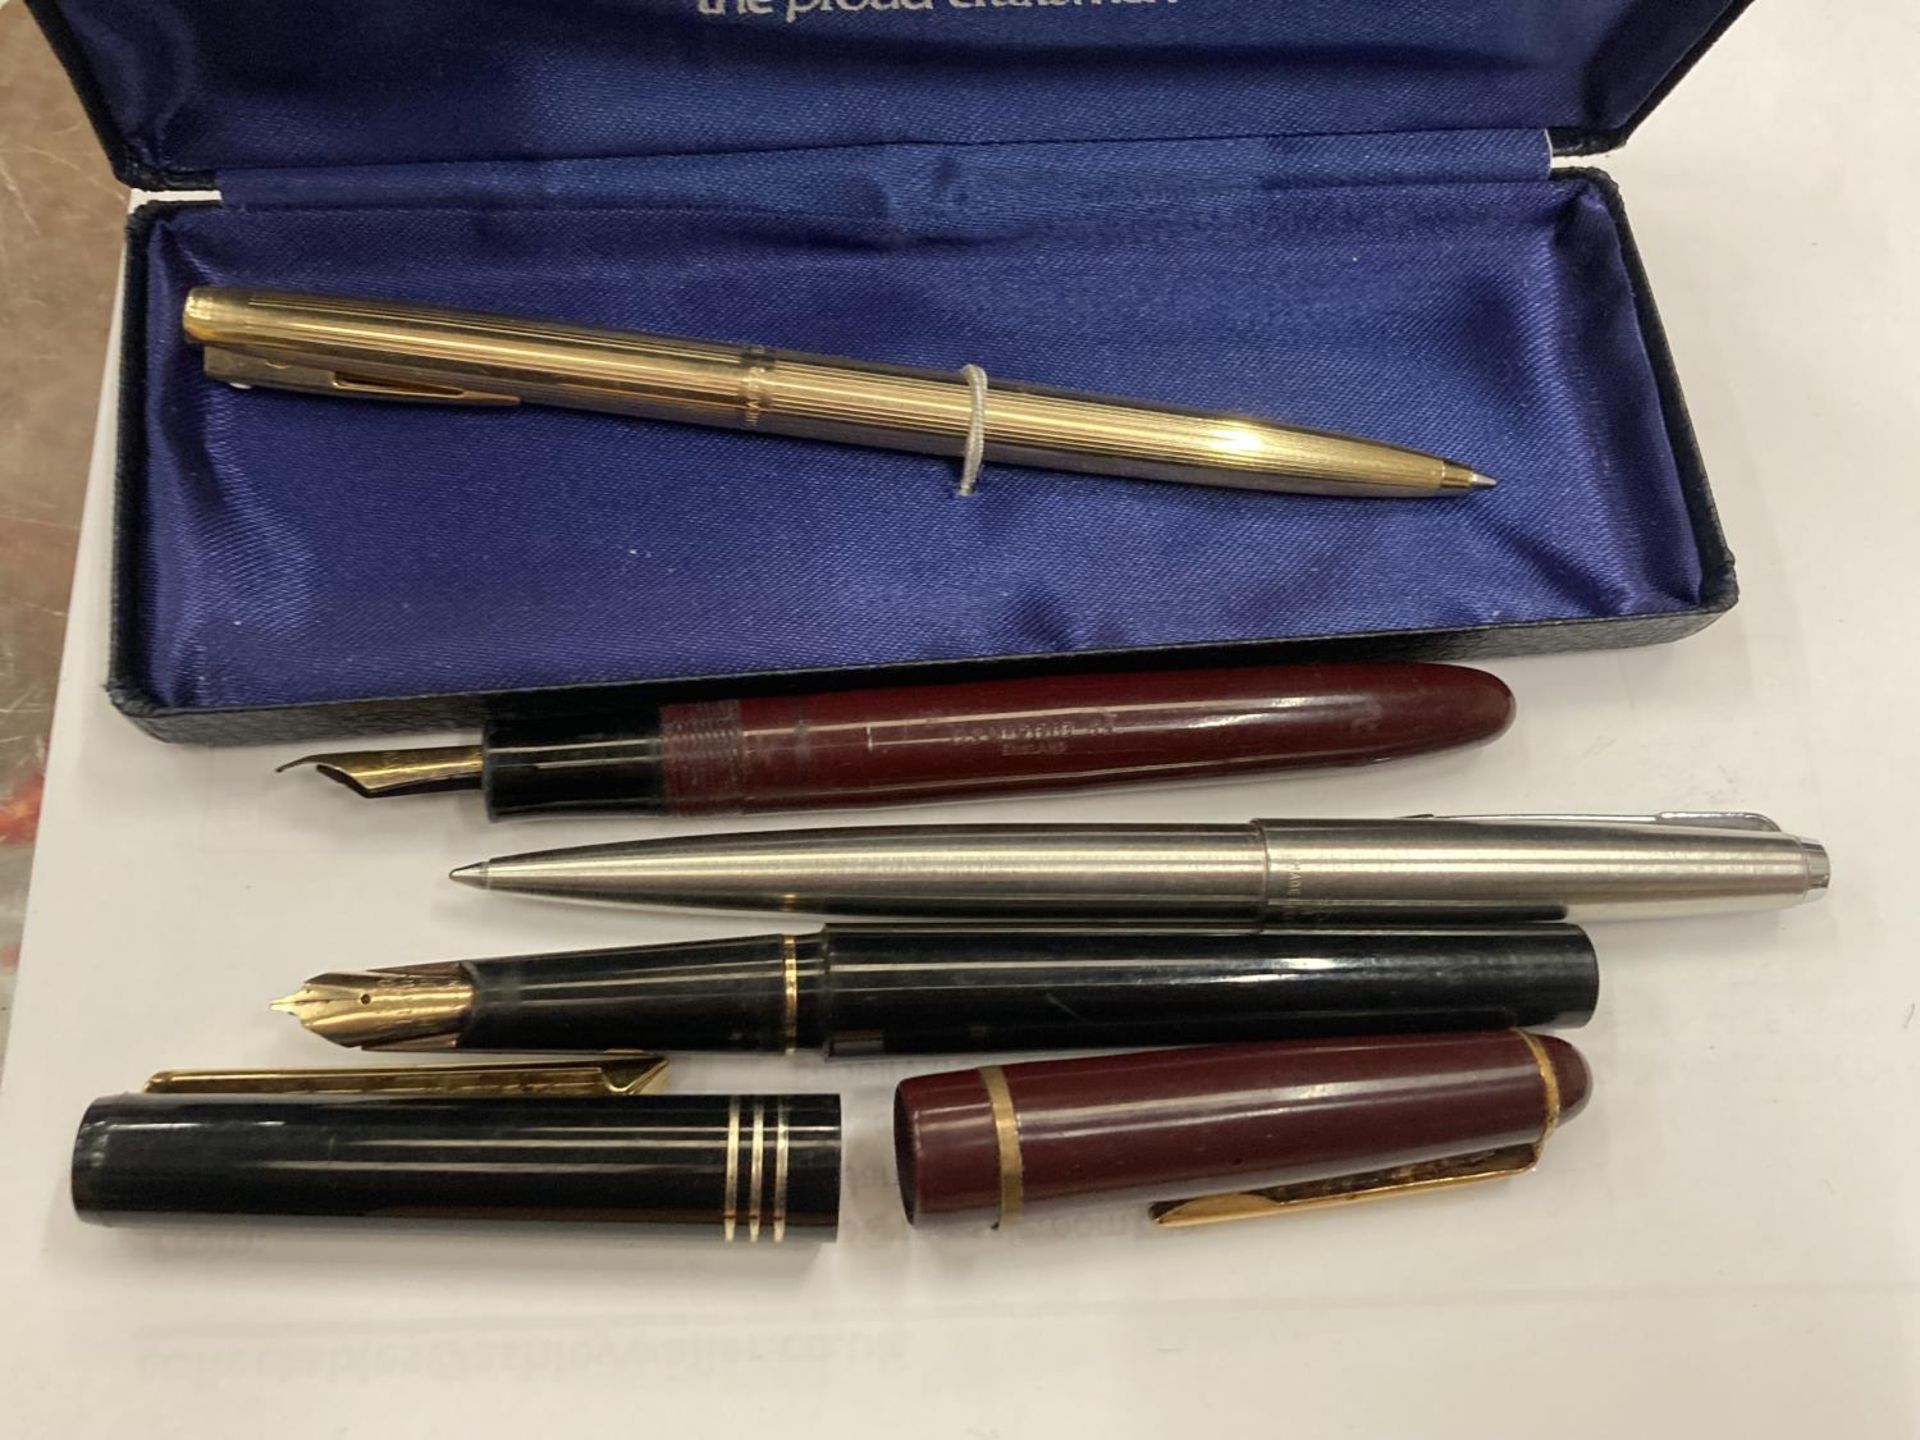 FOUR VINTAGE PENS TO INCLUDE A PARKER BIRO AND TWO FOUNTAIN PENS - Image 3 of 3